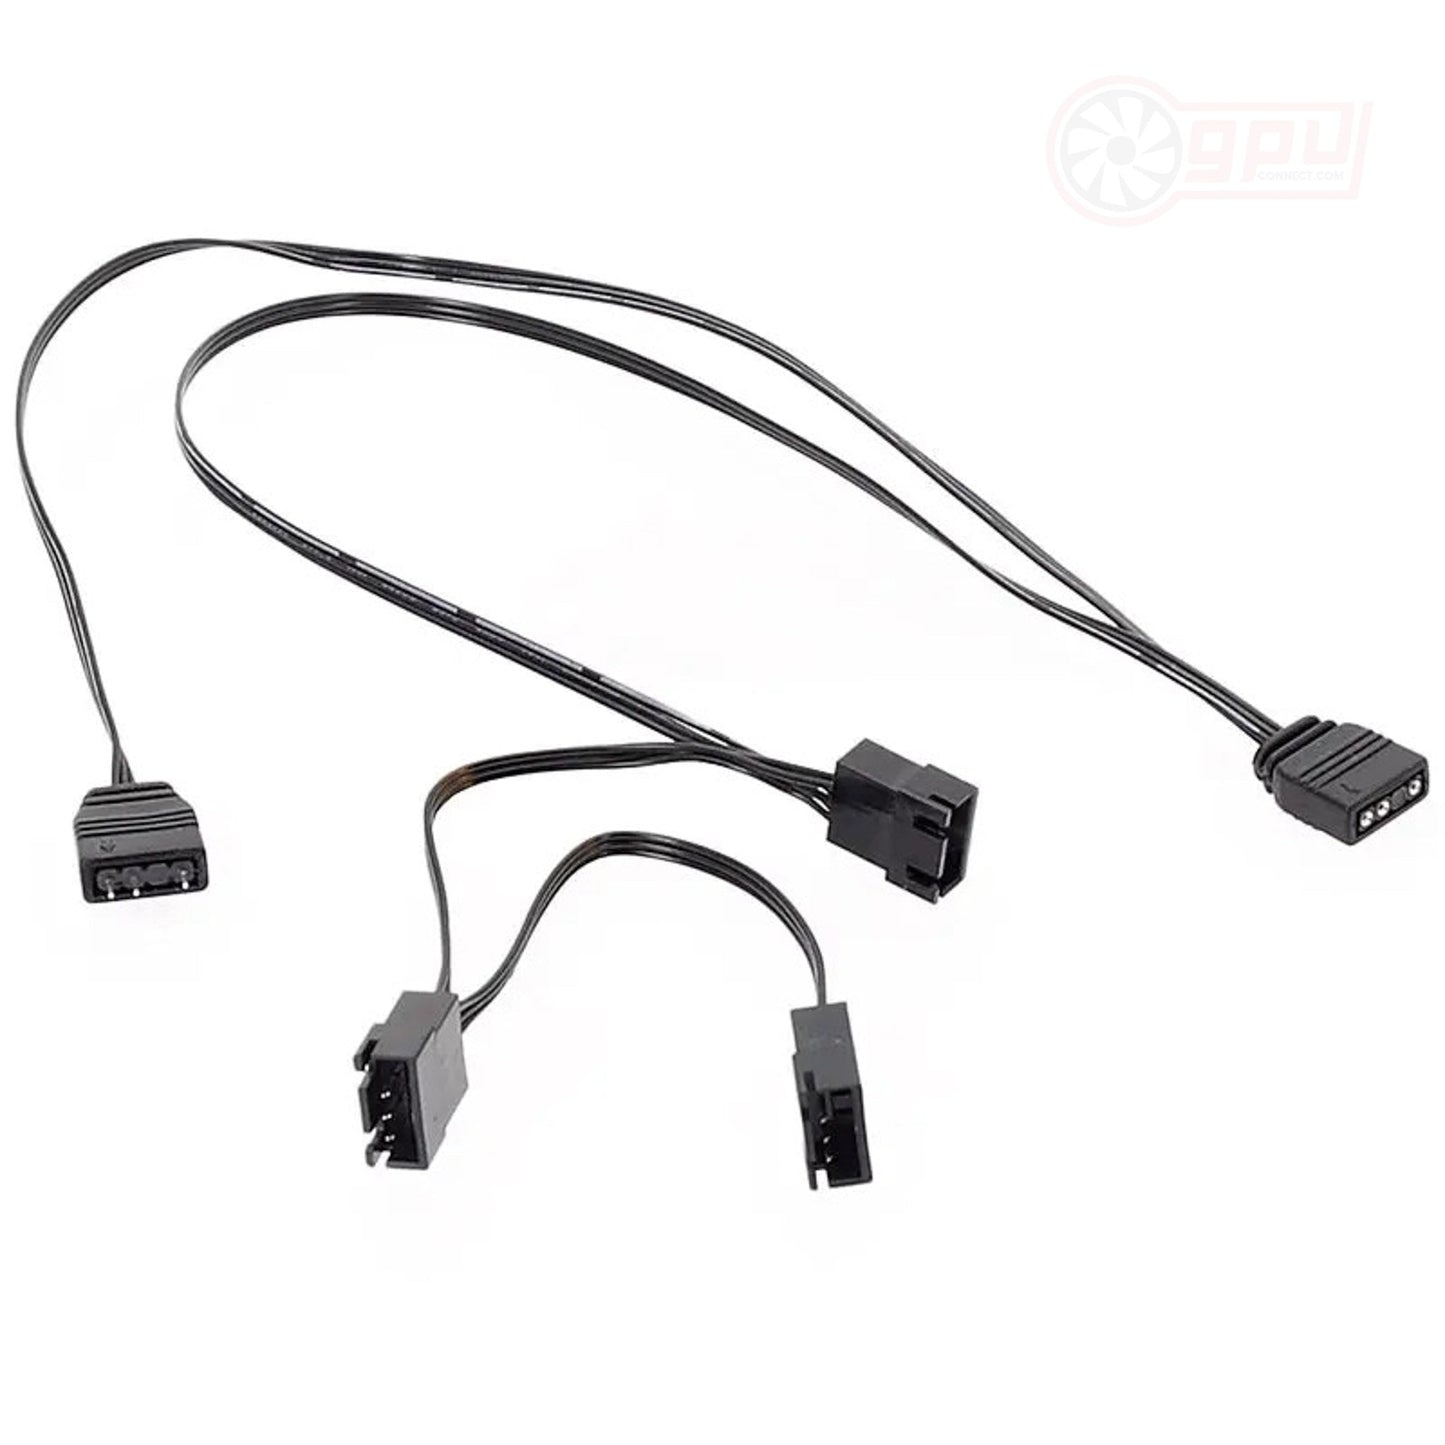 NZXT Aer RGB 2 Fan to Standard ARGB Adapter Motherboard Control Cable - GPUCONNECT.COM